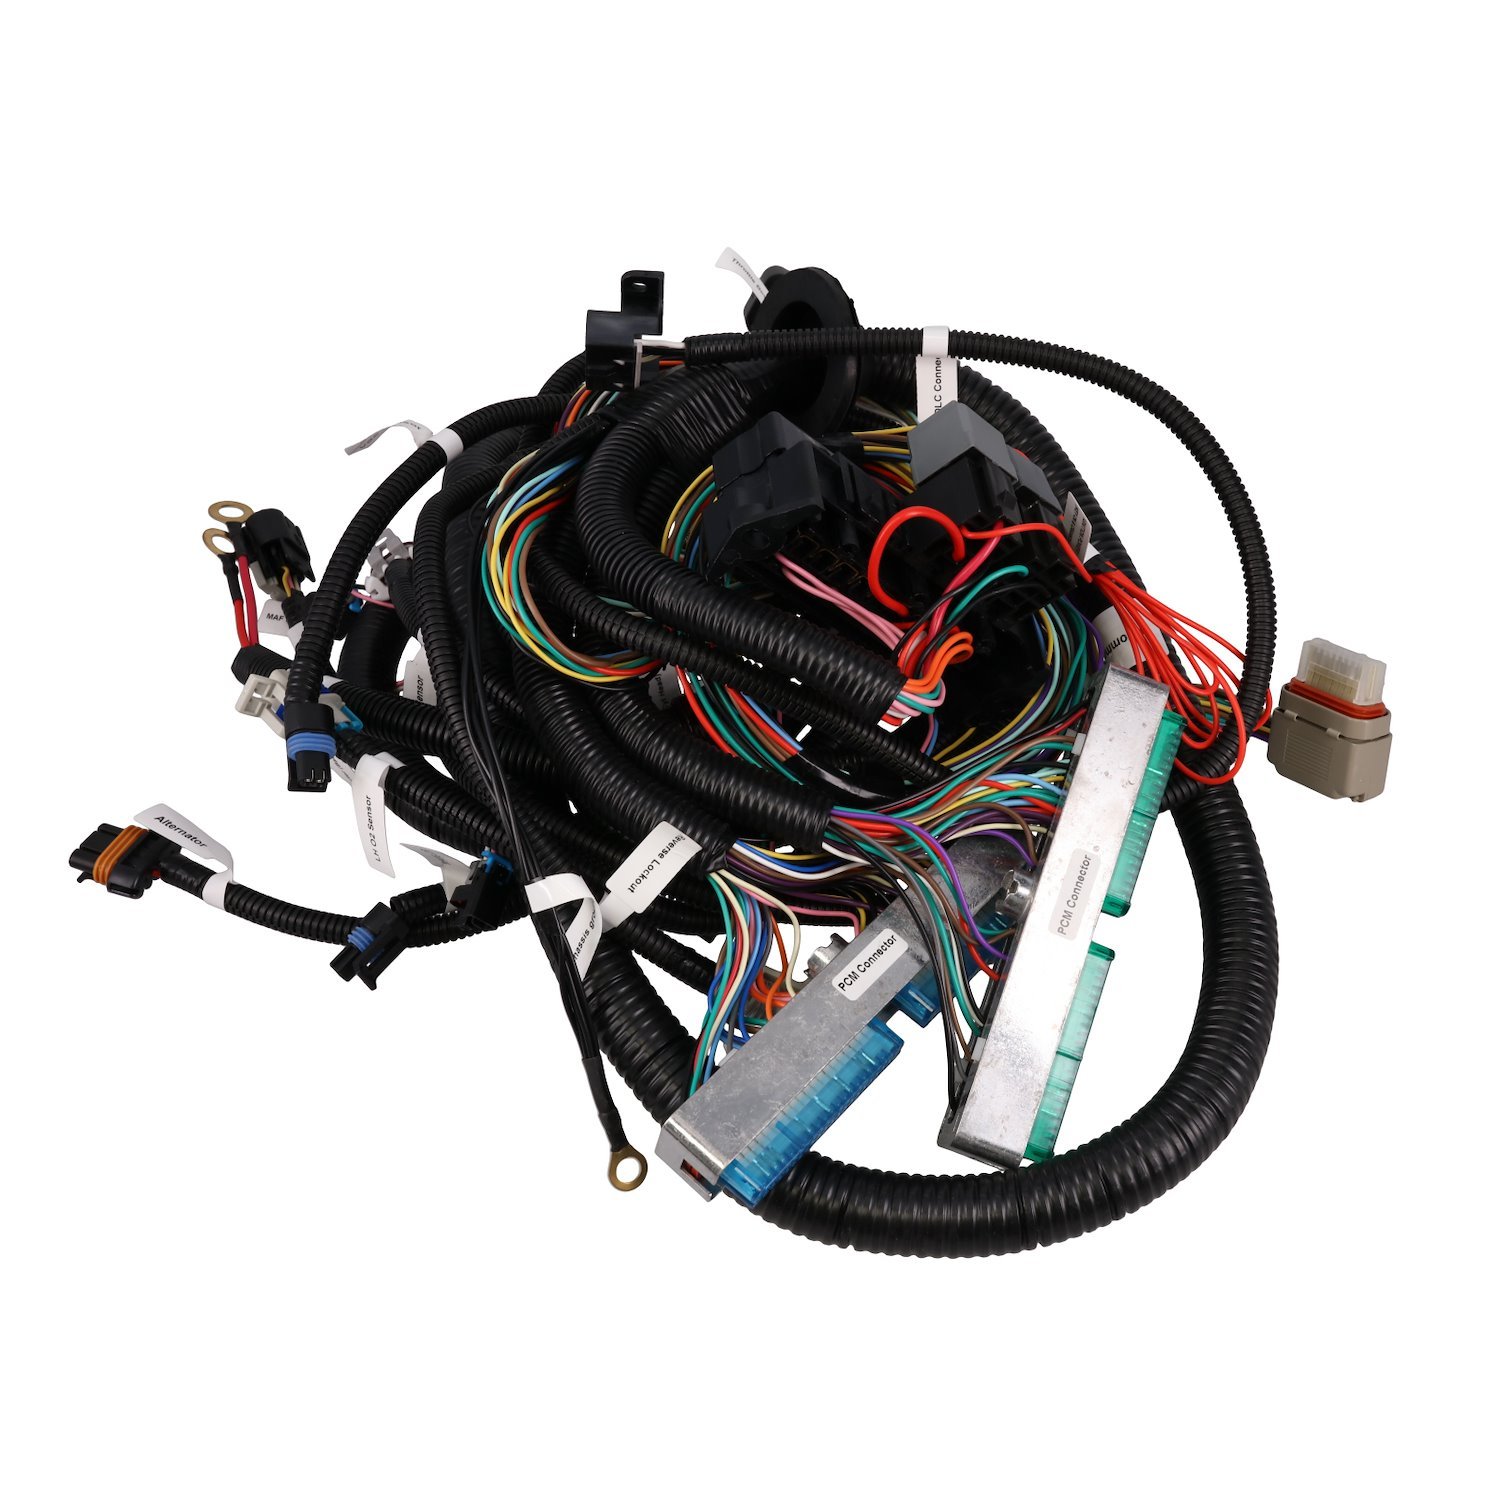 WH1212 Standalone Wiring Harness, LH6, LY5, LMG, LH8 Drive by Wire w 4L60E 13-pin auto